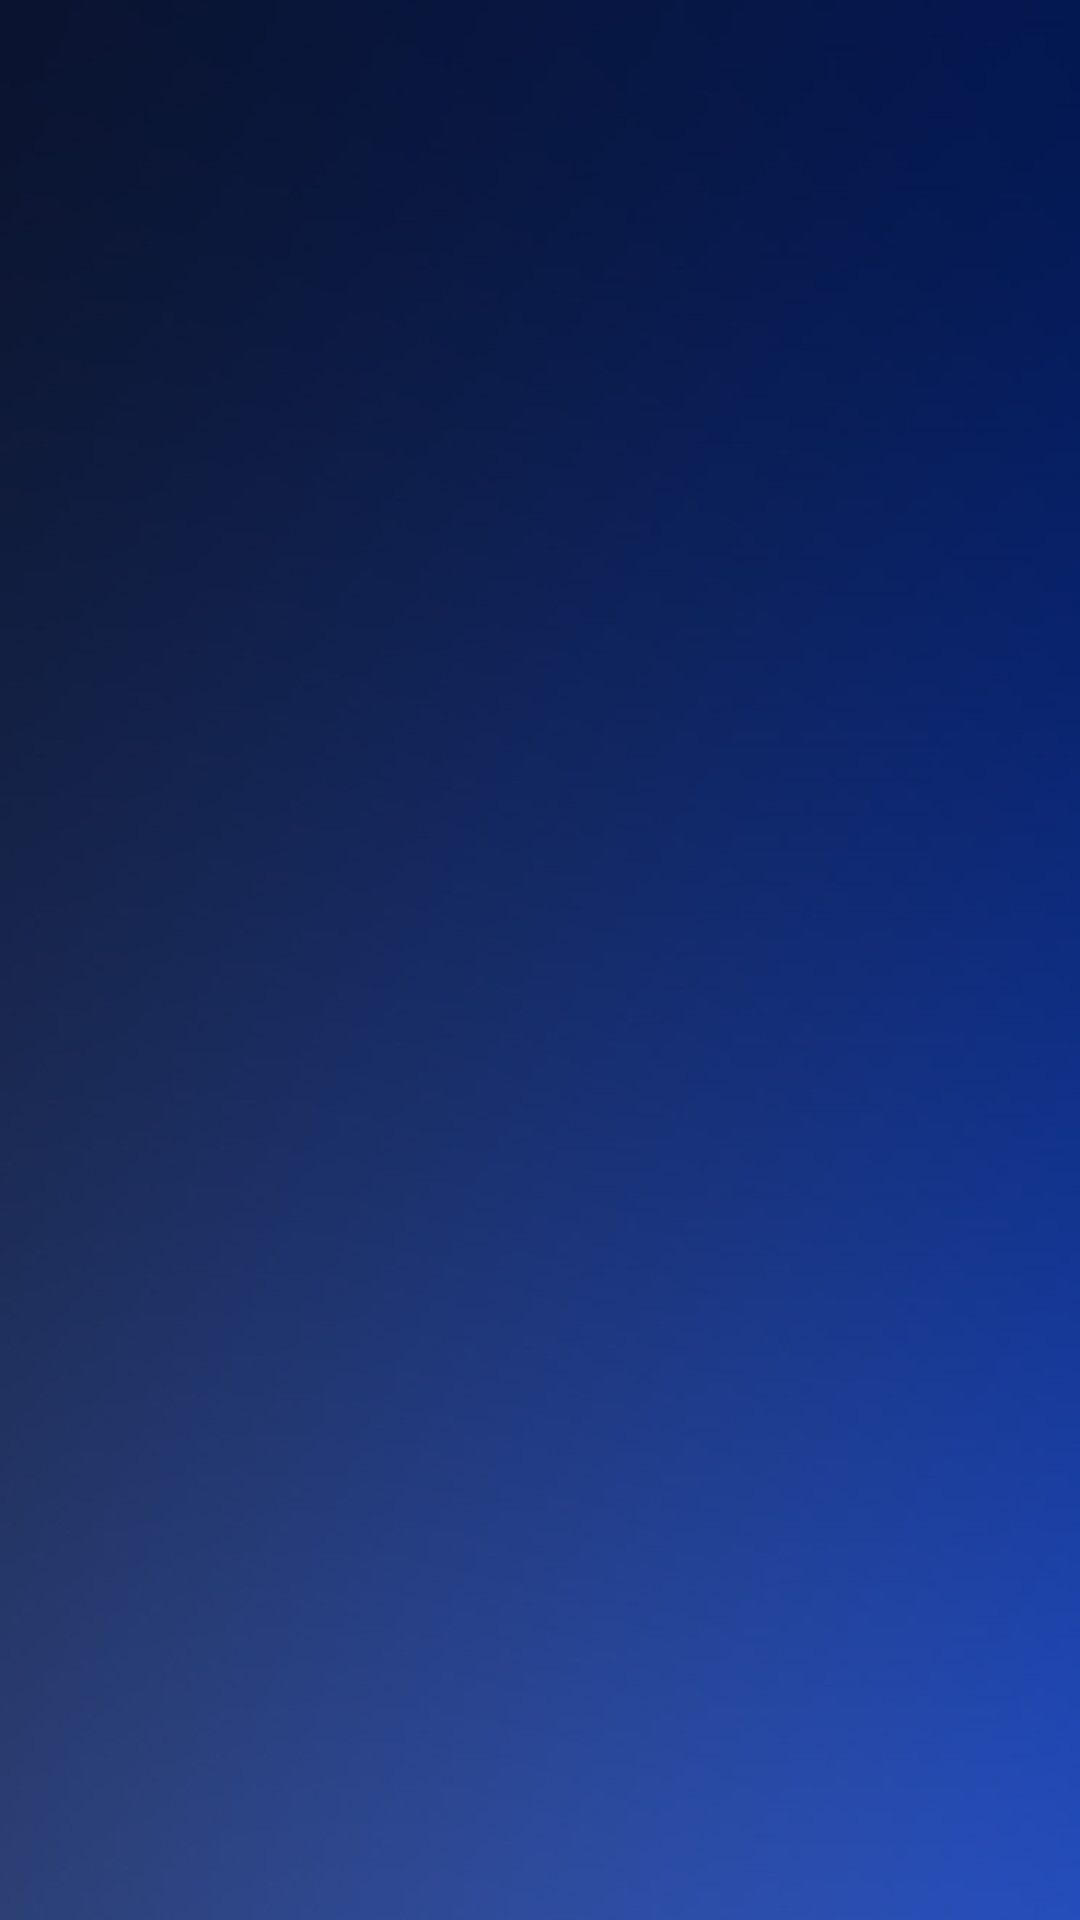 Wallpaper IPhone 13 Official Stock Wallpaper in High Resolution Blue   Light Background  Download Free Image